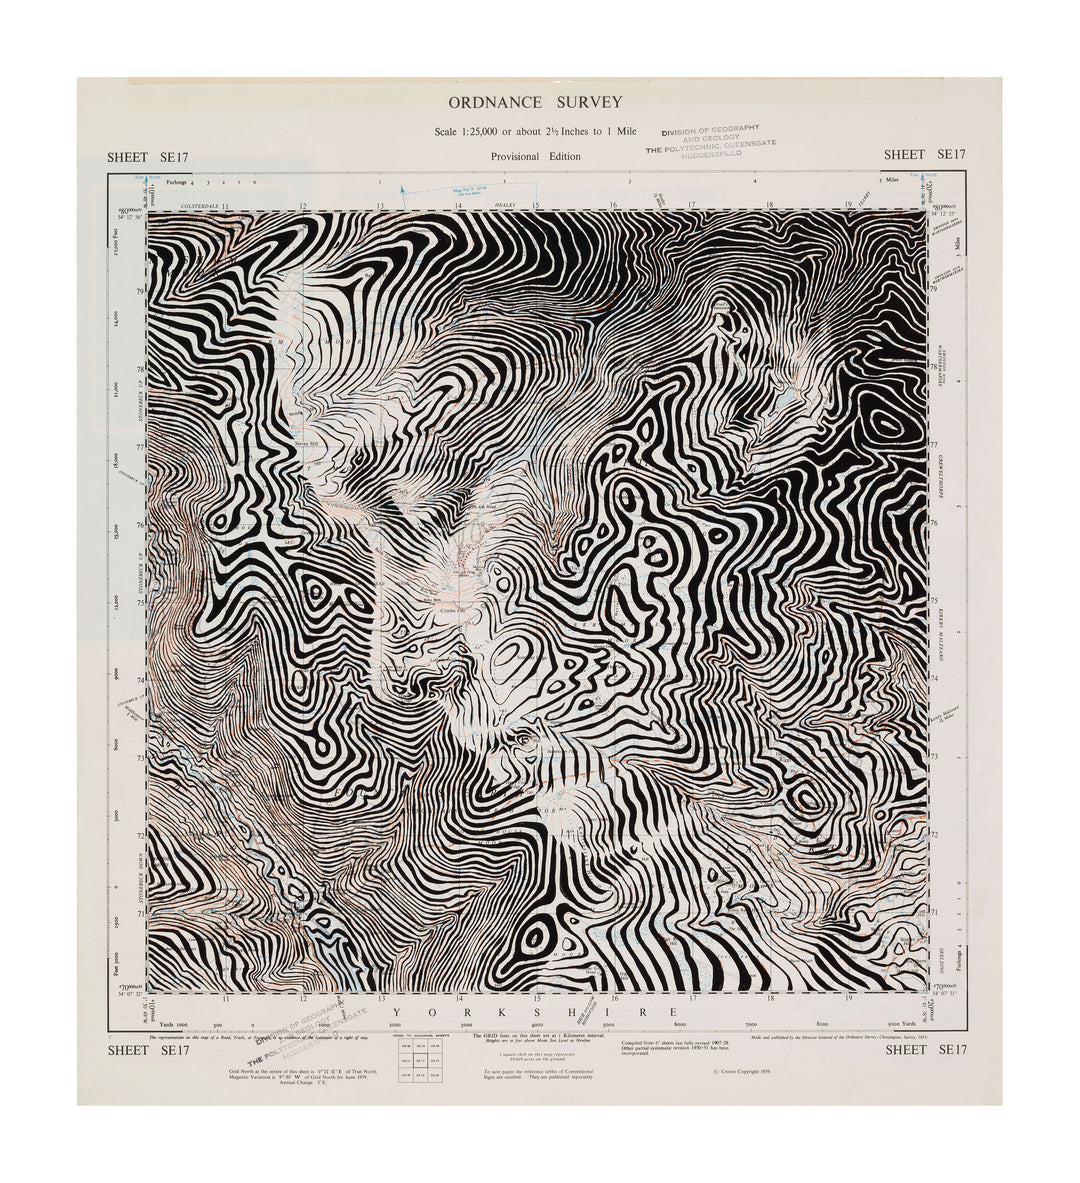 A black and white drawing of a woman's face, available as Ed Fairburn | "Fountains Earth, United Kingdom" unframed prints.